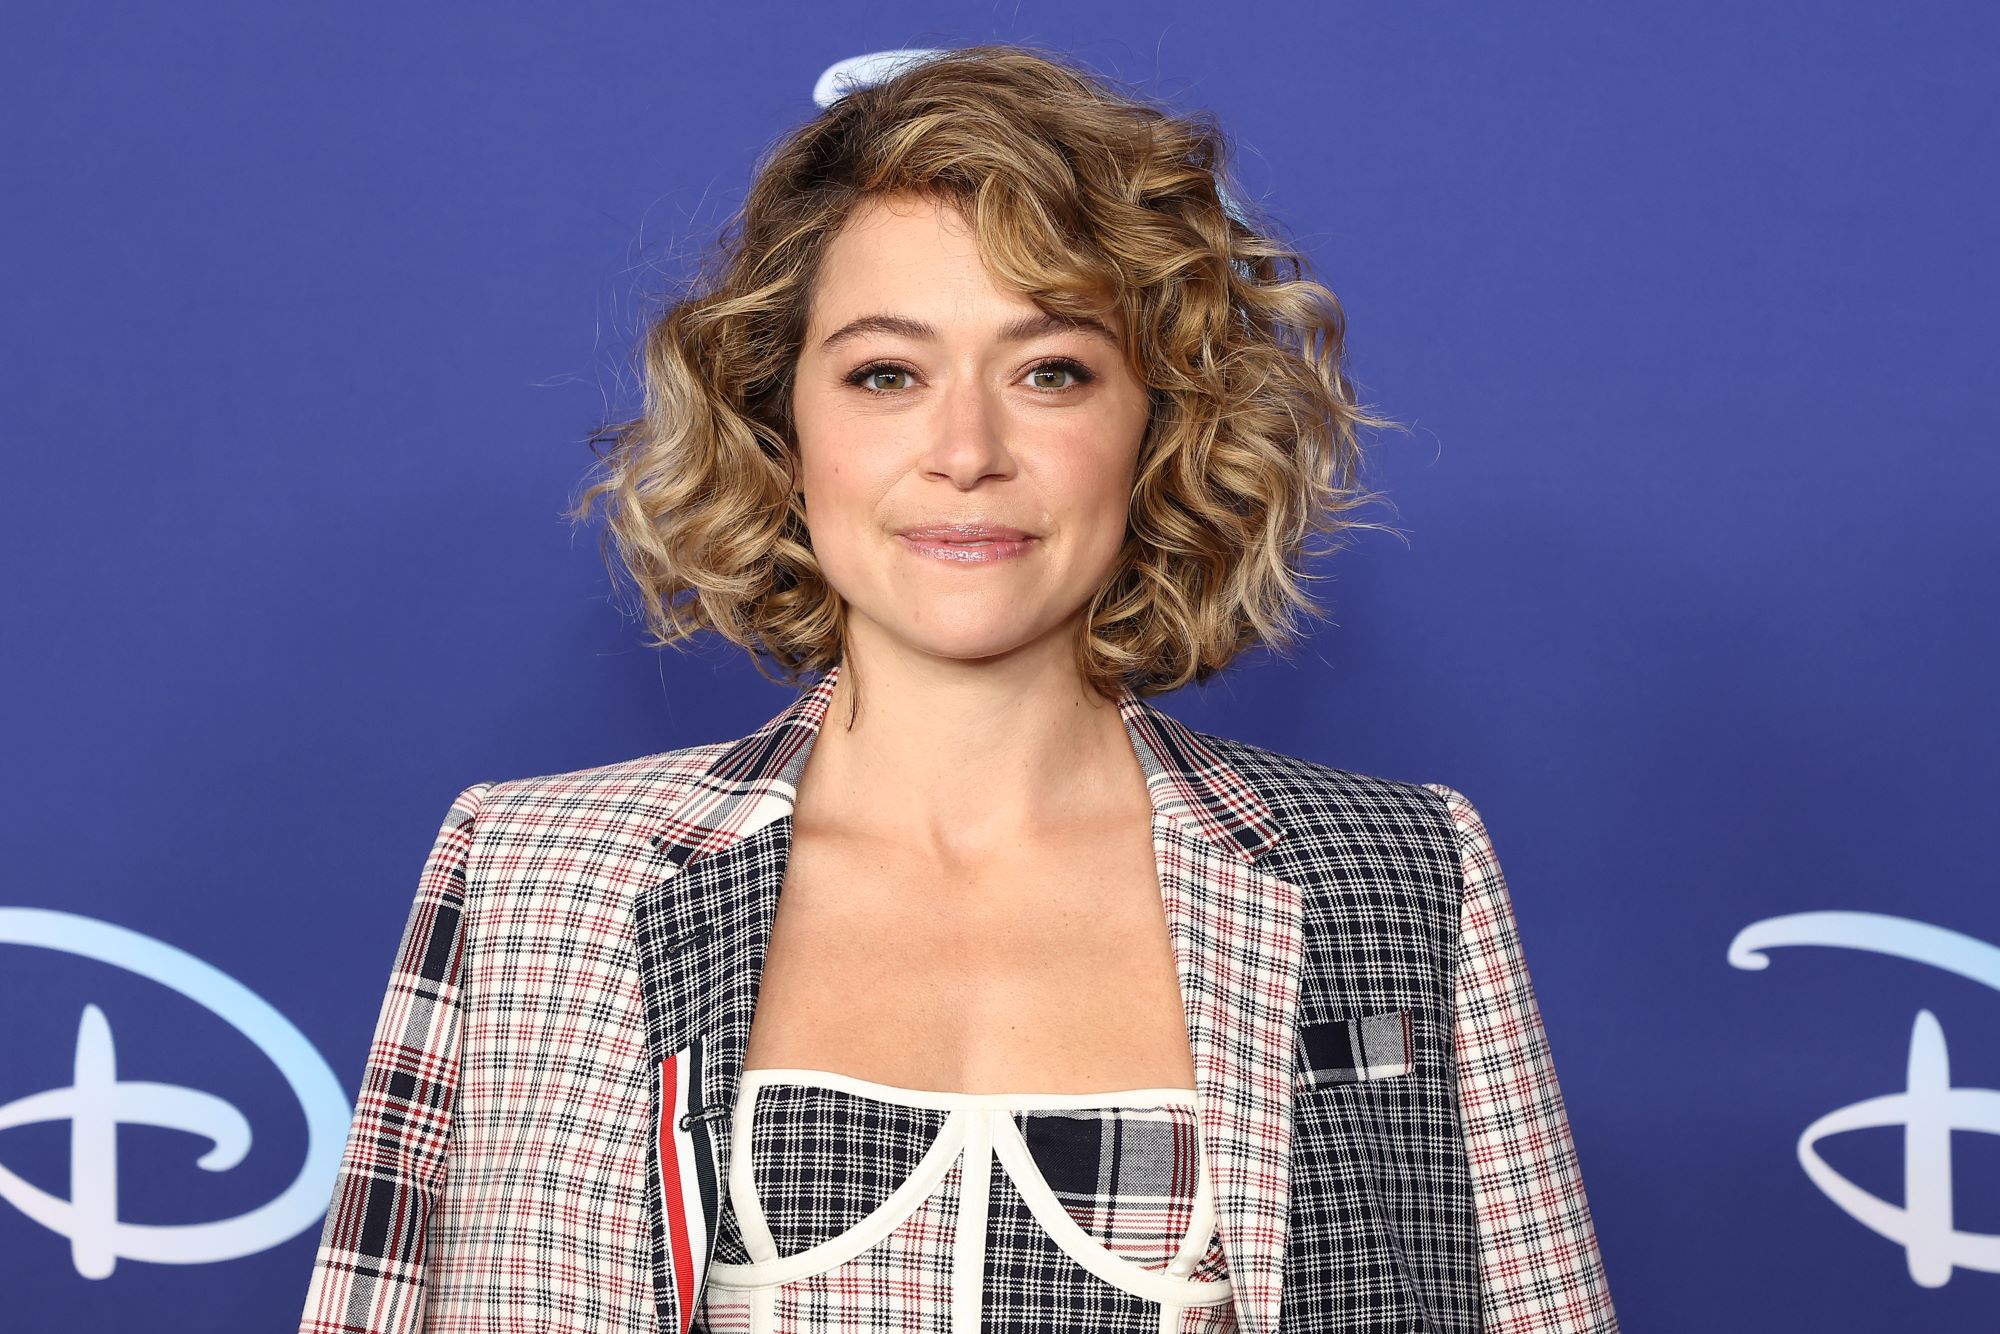 Tatiana Maslany, who stars in the MCU's 'She-Hulk: Attorney at Law,' wears a black, red, and white plaid suit jacket.